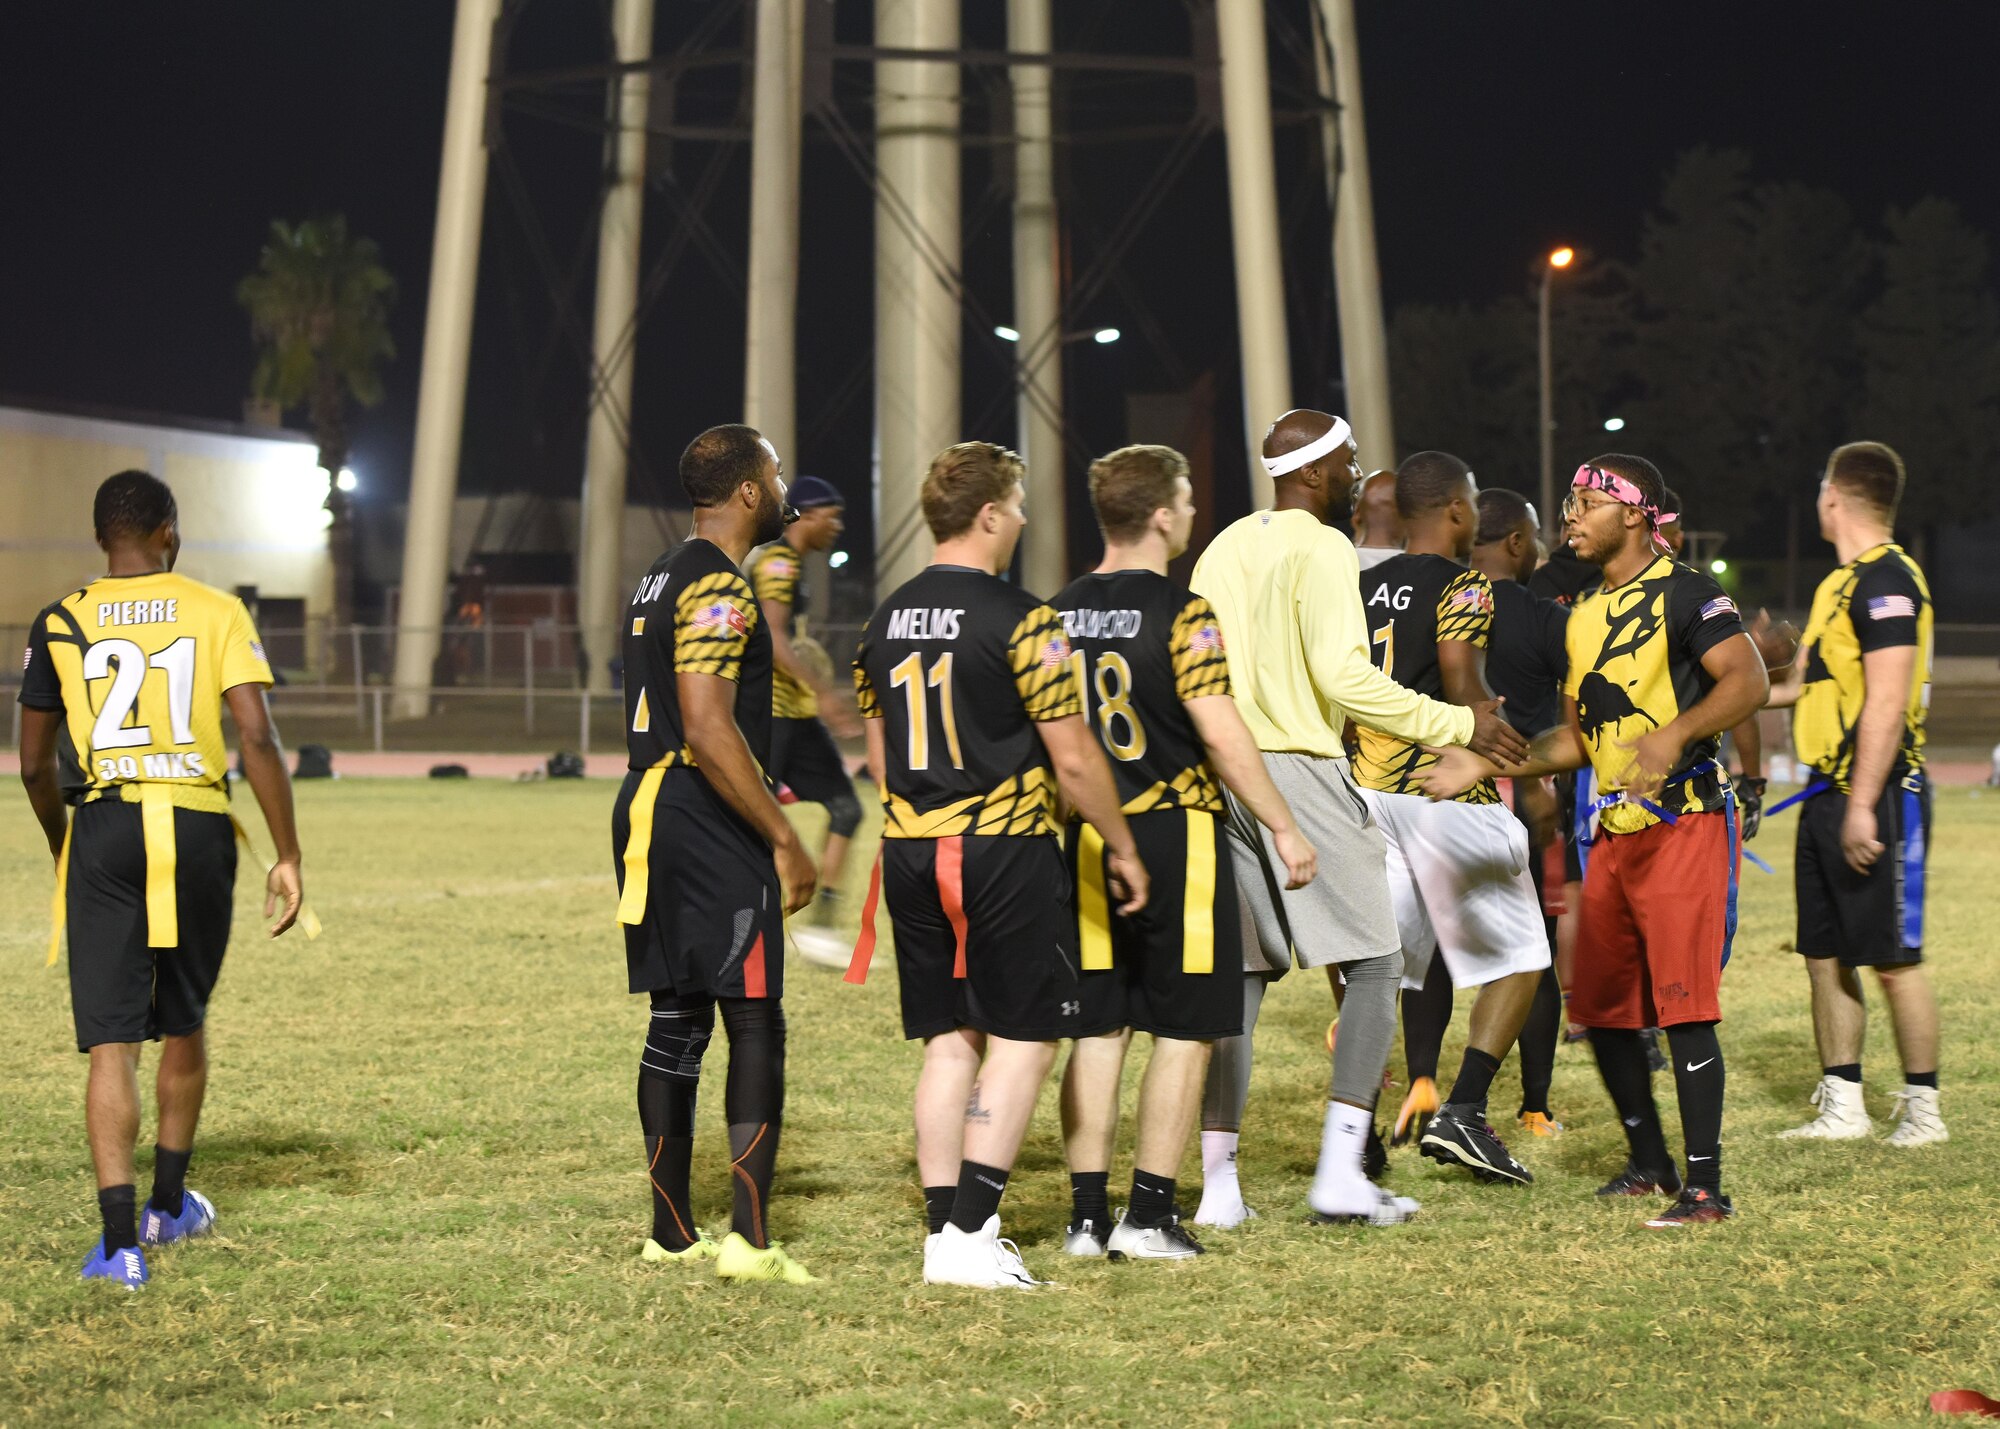 The 39th LRS team finished the intramural flag football season undefeated.